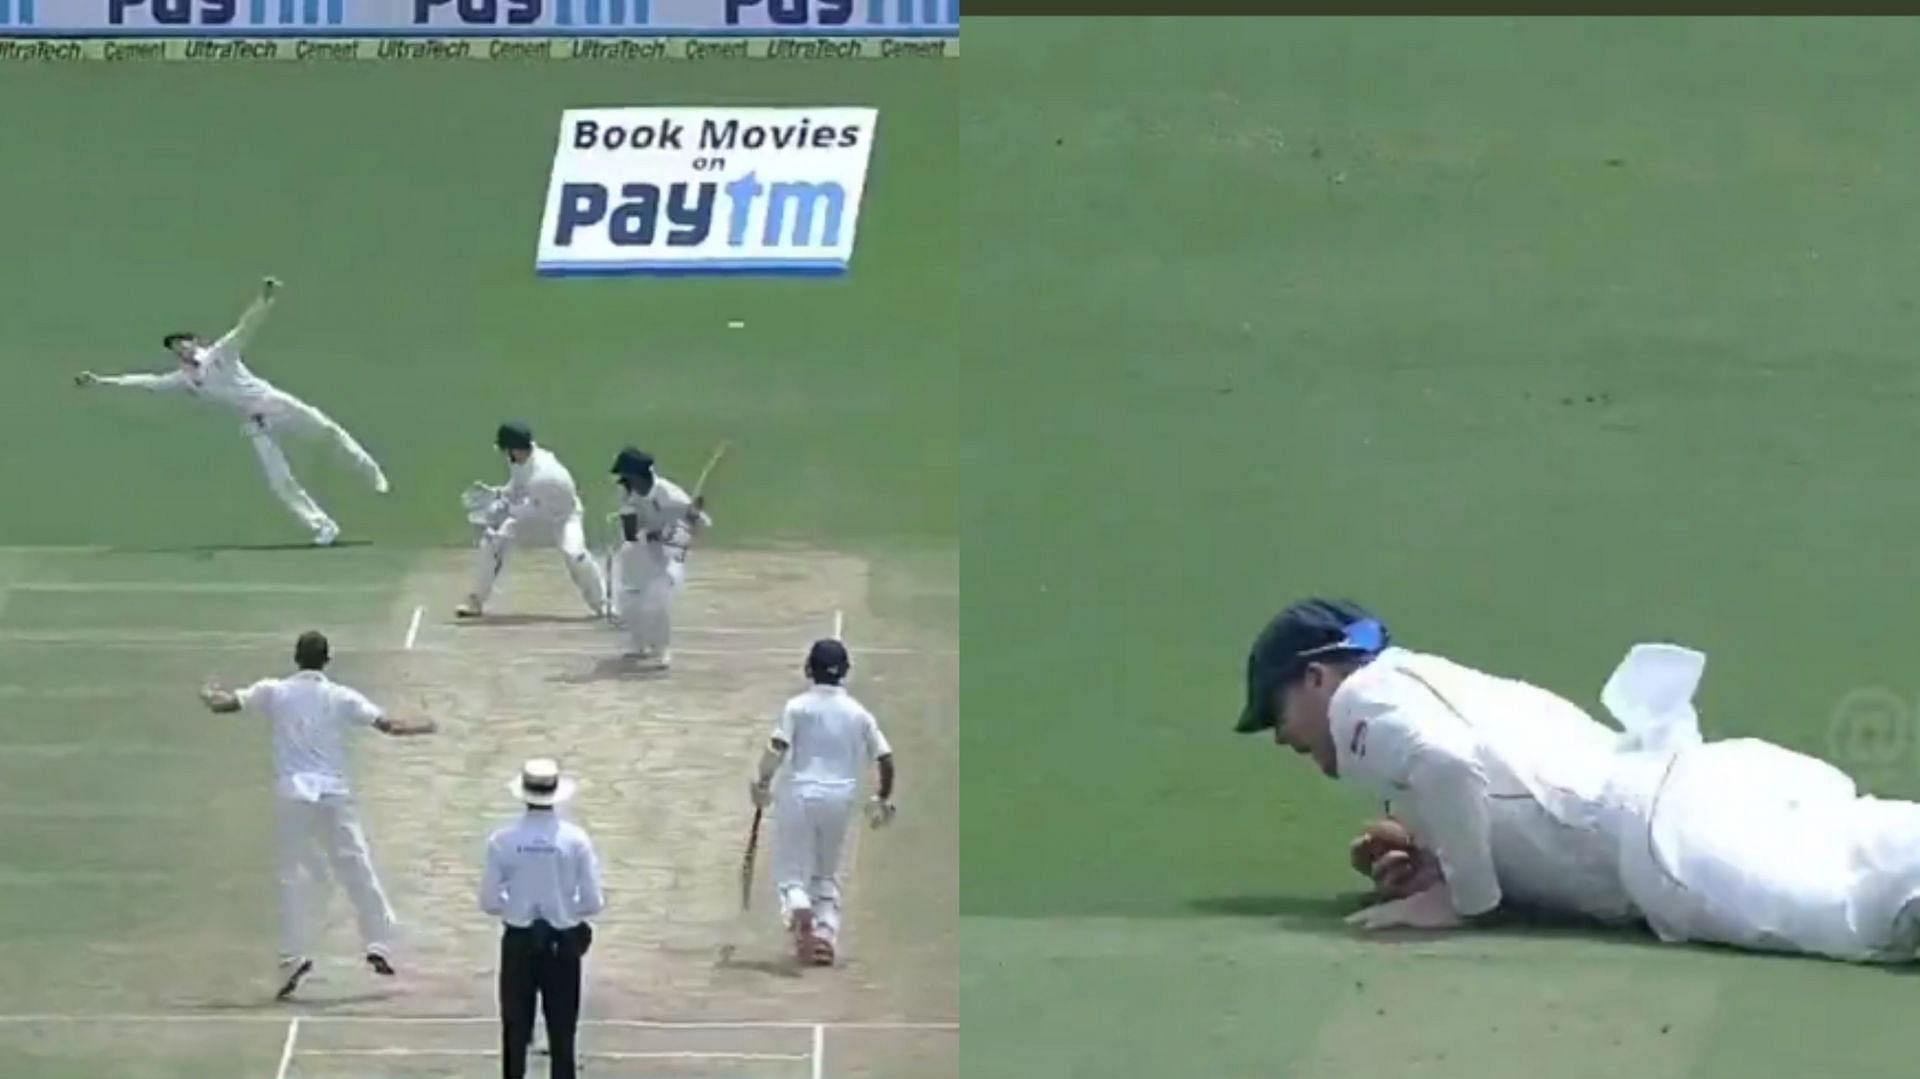 Steve Smith has taken some great catches against India (Image: Twitter)